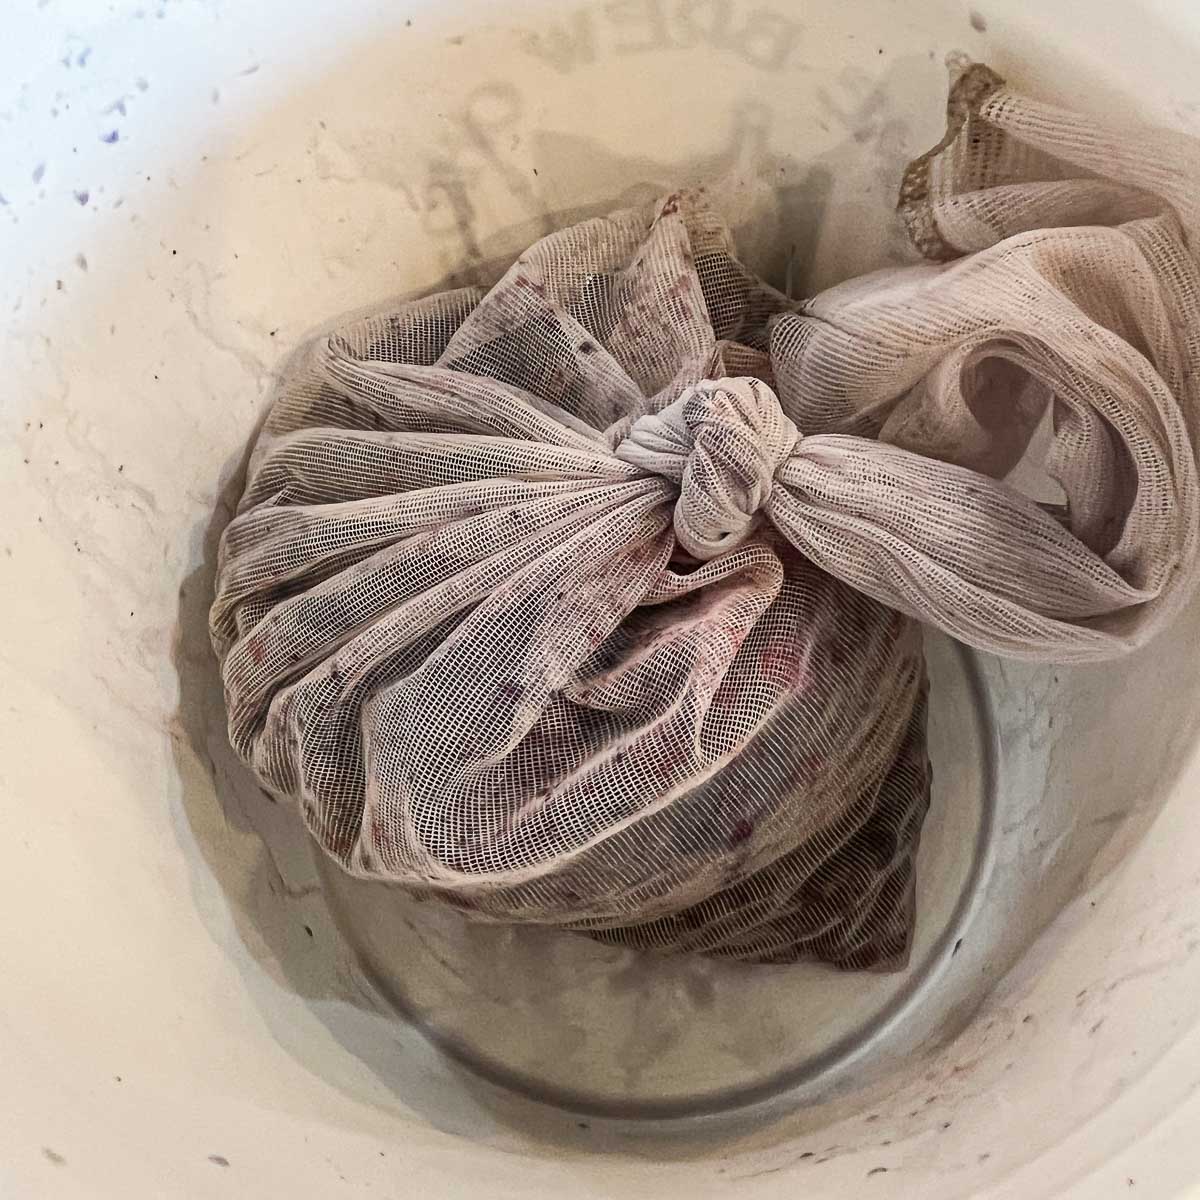 mesh bag tied in a knot